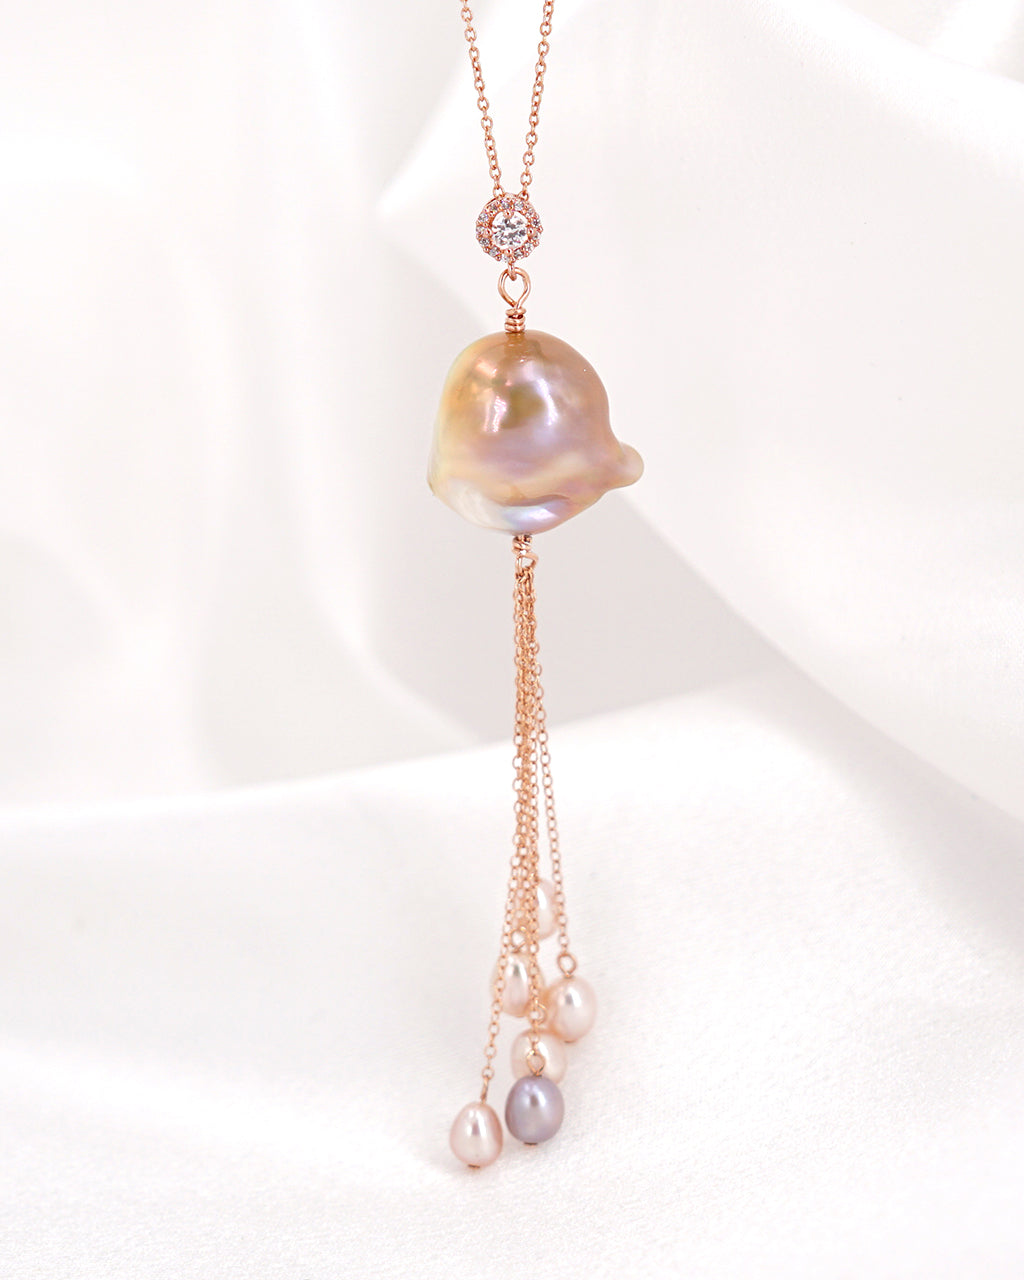 Baroque Pearl Tassel Necklace - Wedding Bridal Jewelry for Brides and Bridesmaids | Singapore